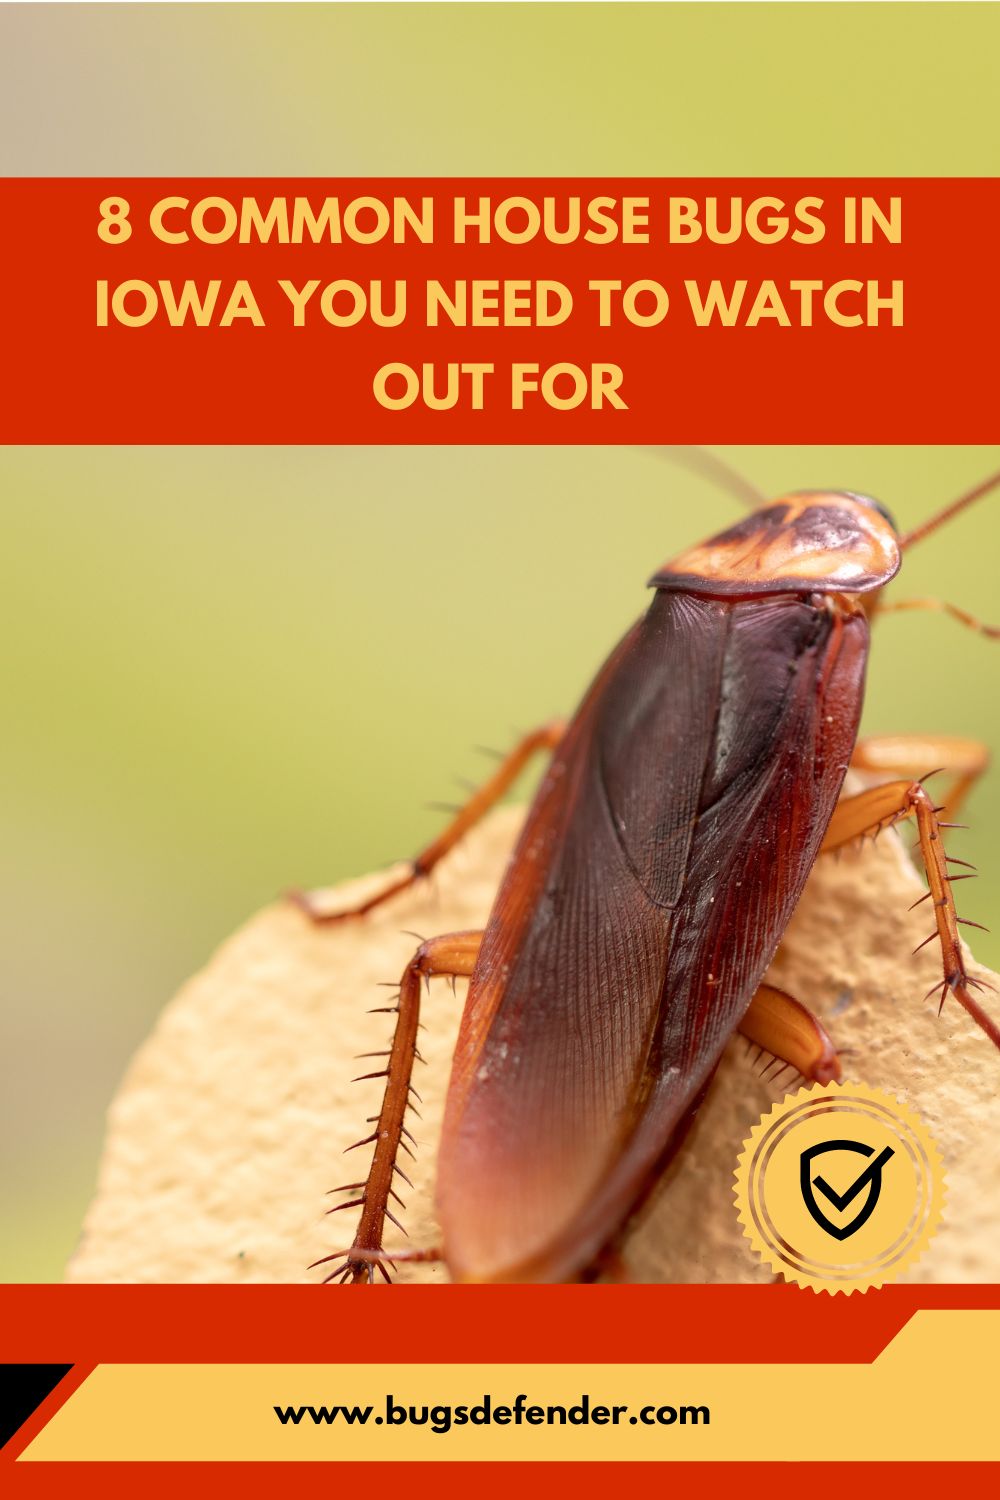 8 Common House Bugs In Iowa You Need To Watch Out For pin2